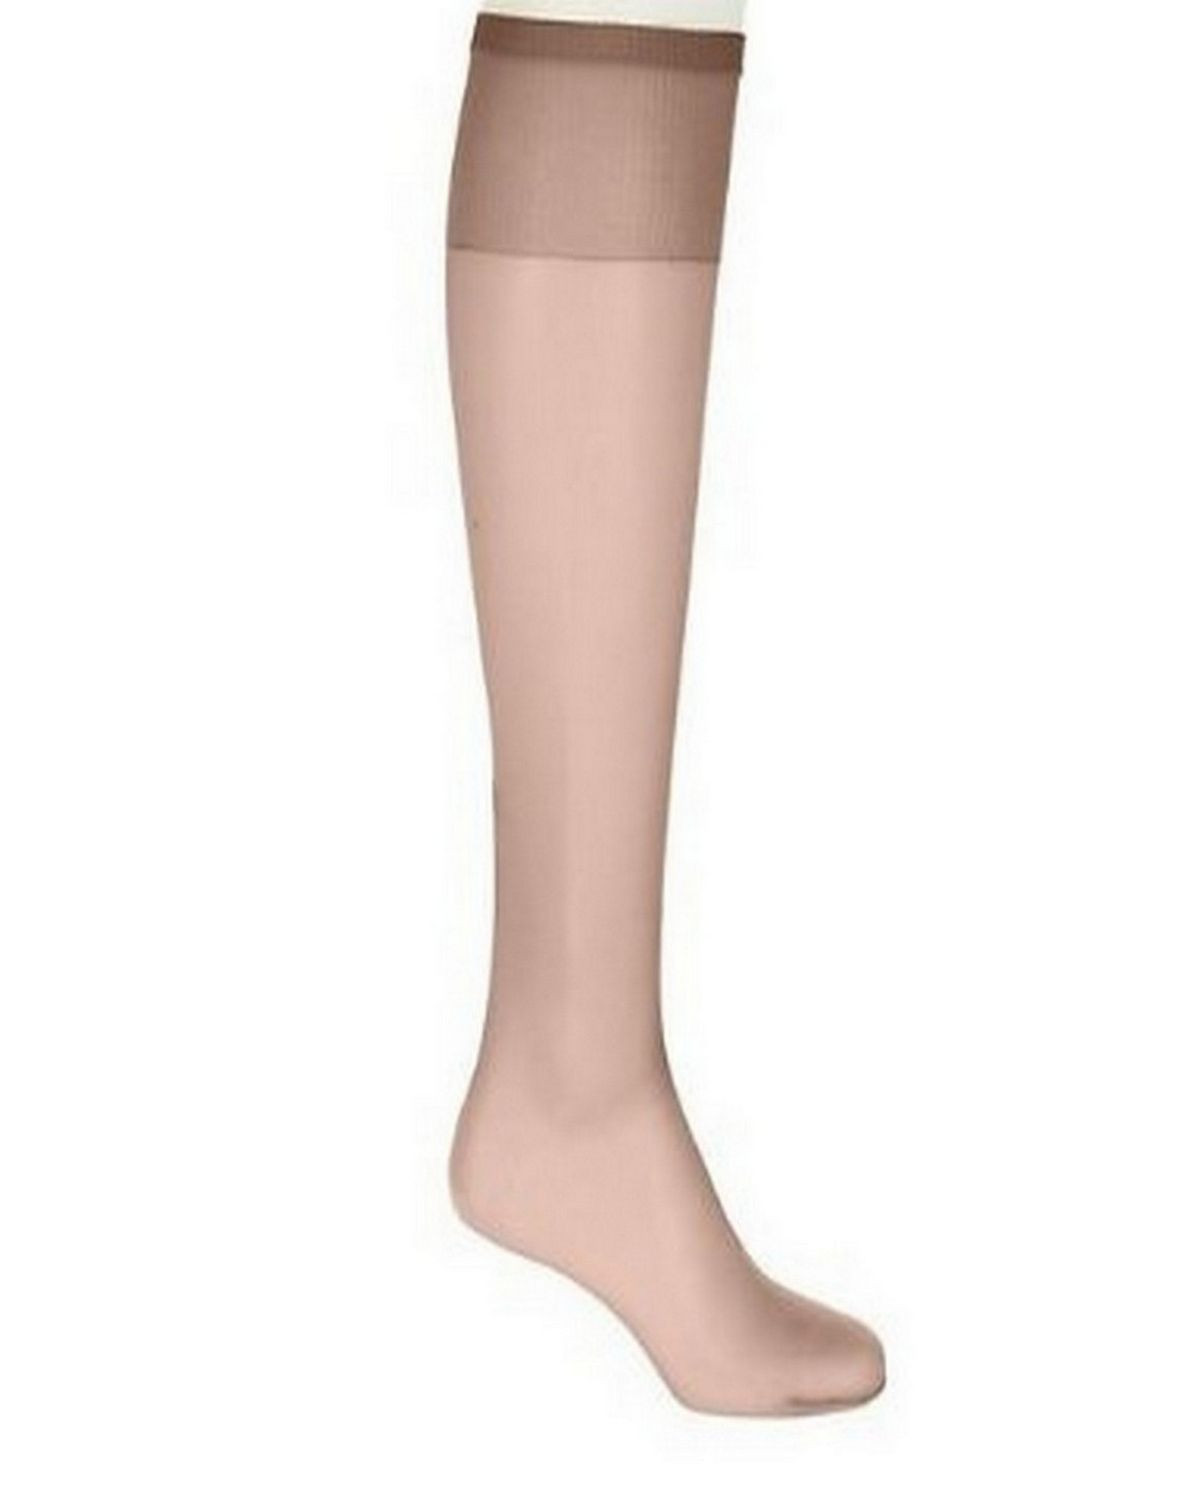 Hanes 00P19 Women's Silk Reflections Plus Silky Sheer Knee High ET - Barely There - One Size #silk